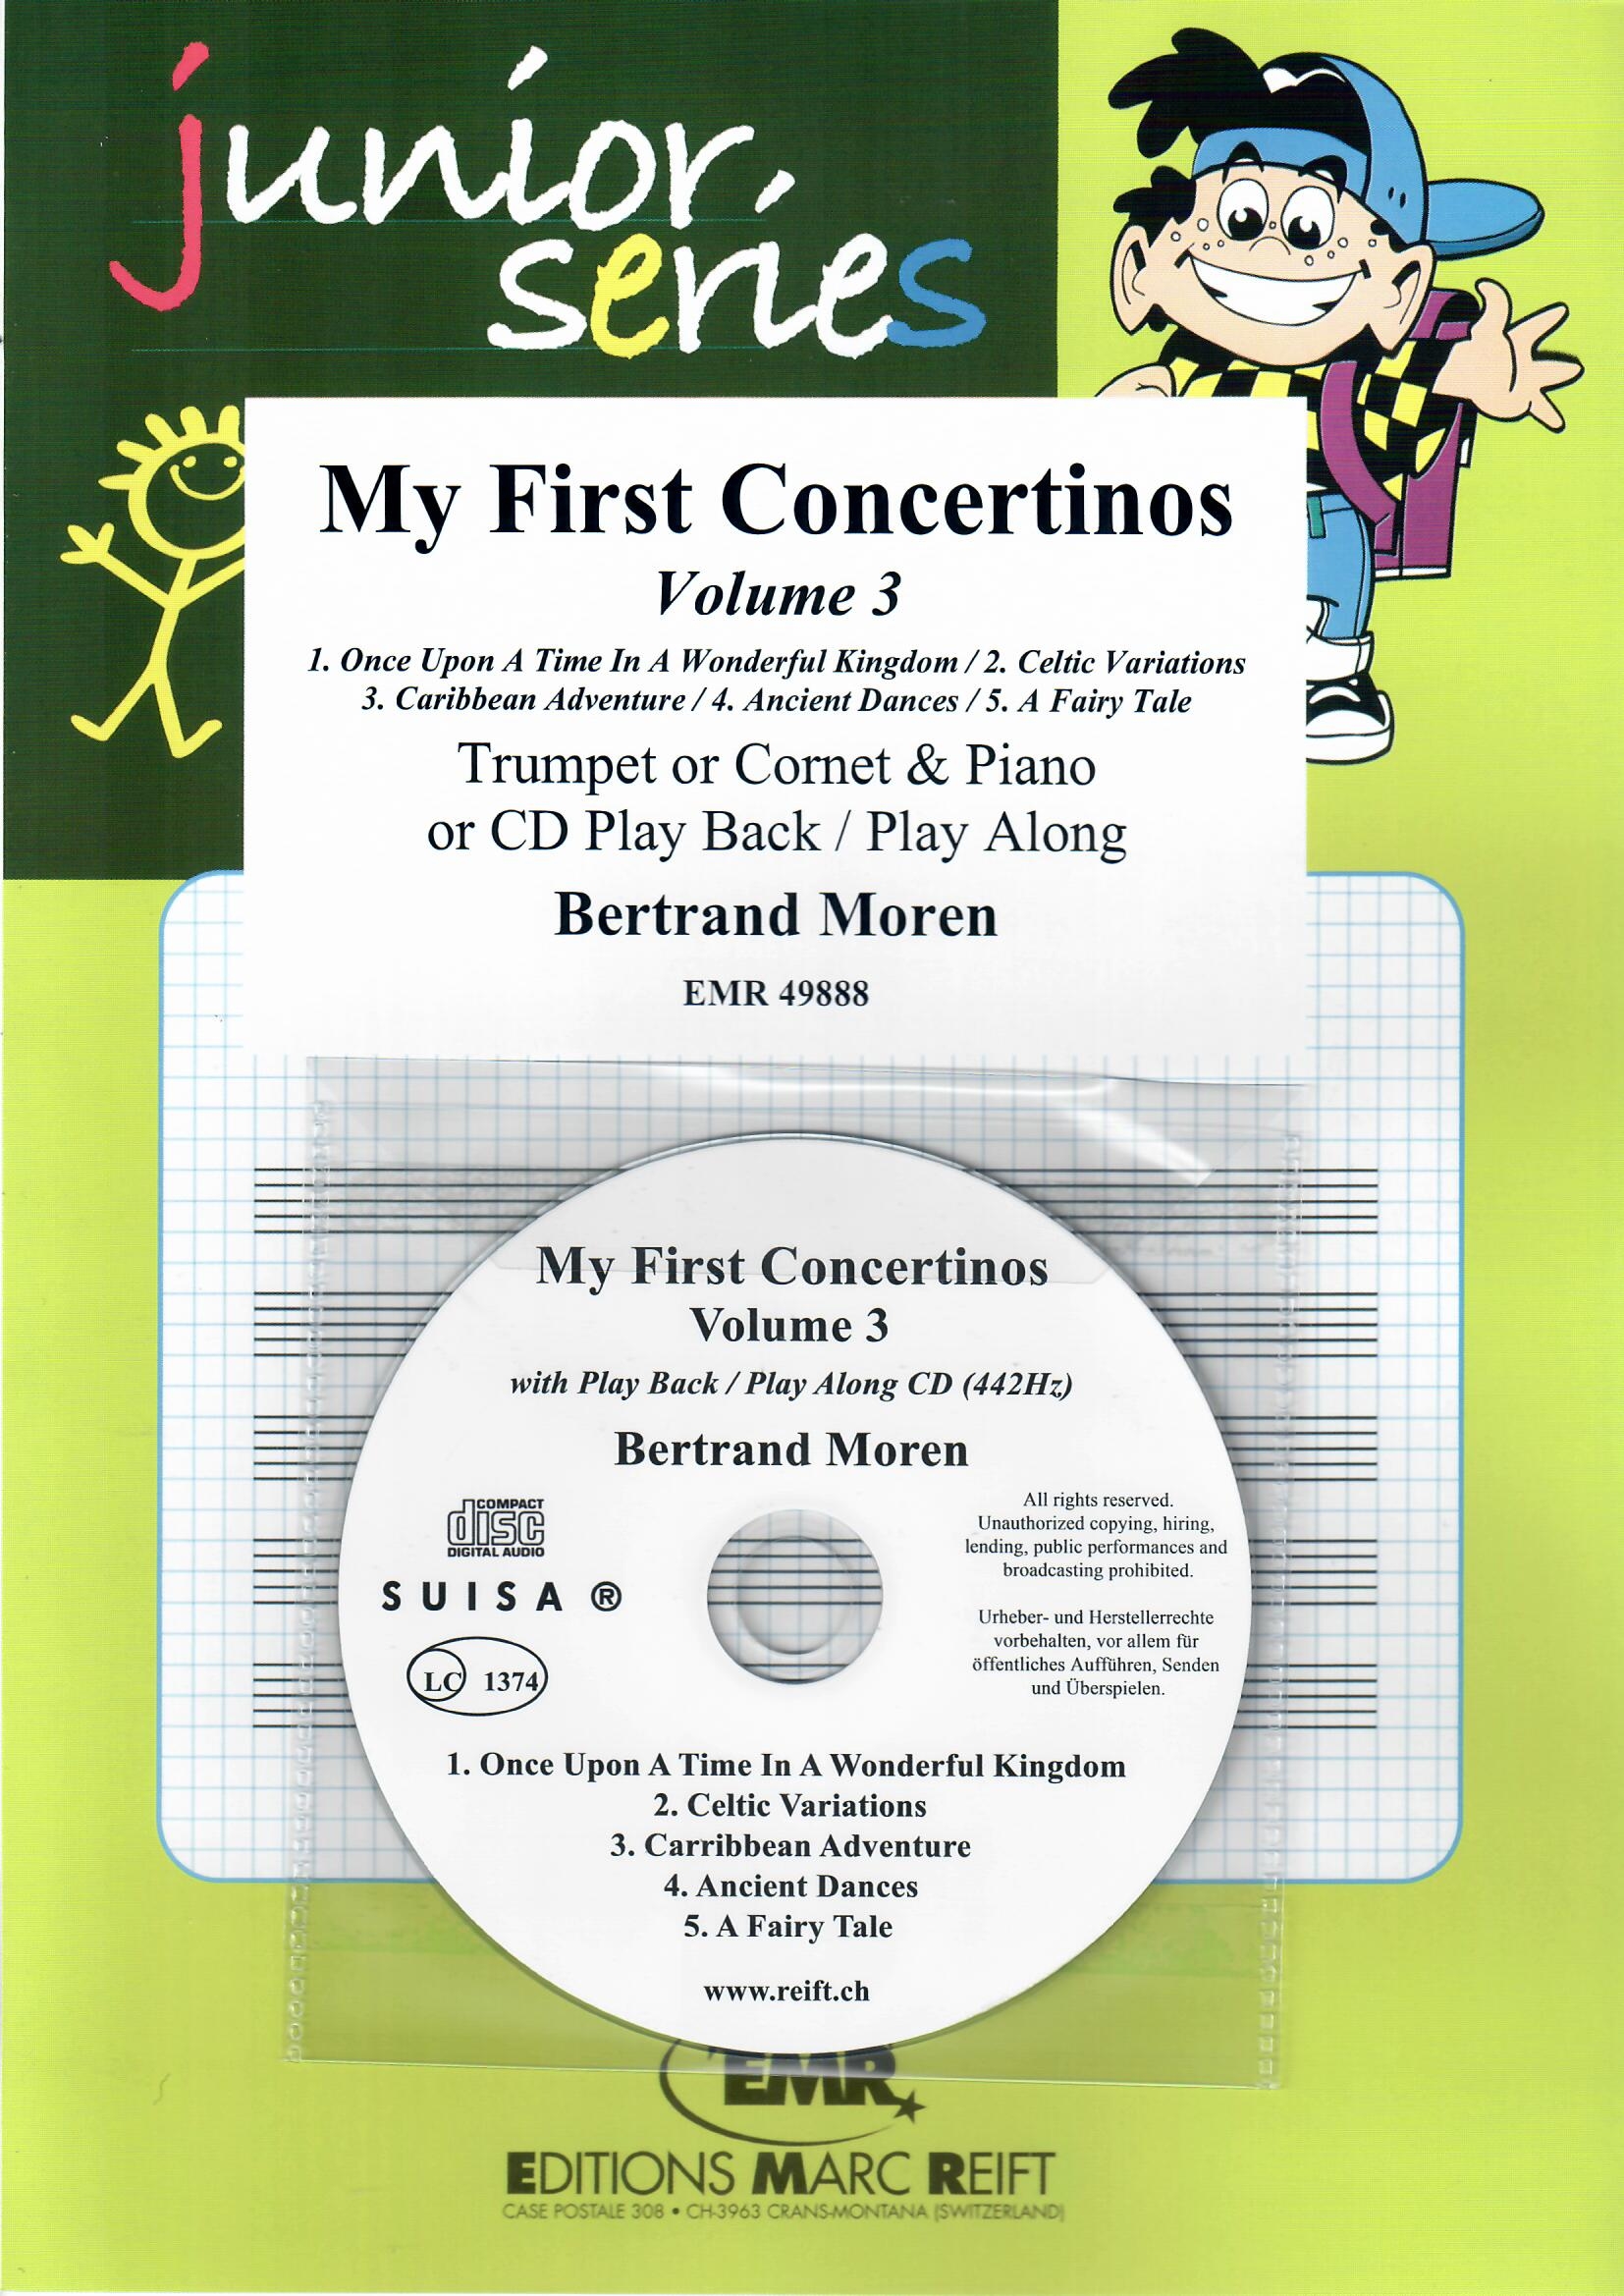 MY FIRST CONCERTINOS VOLUME 3 - Trumpet & Piano